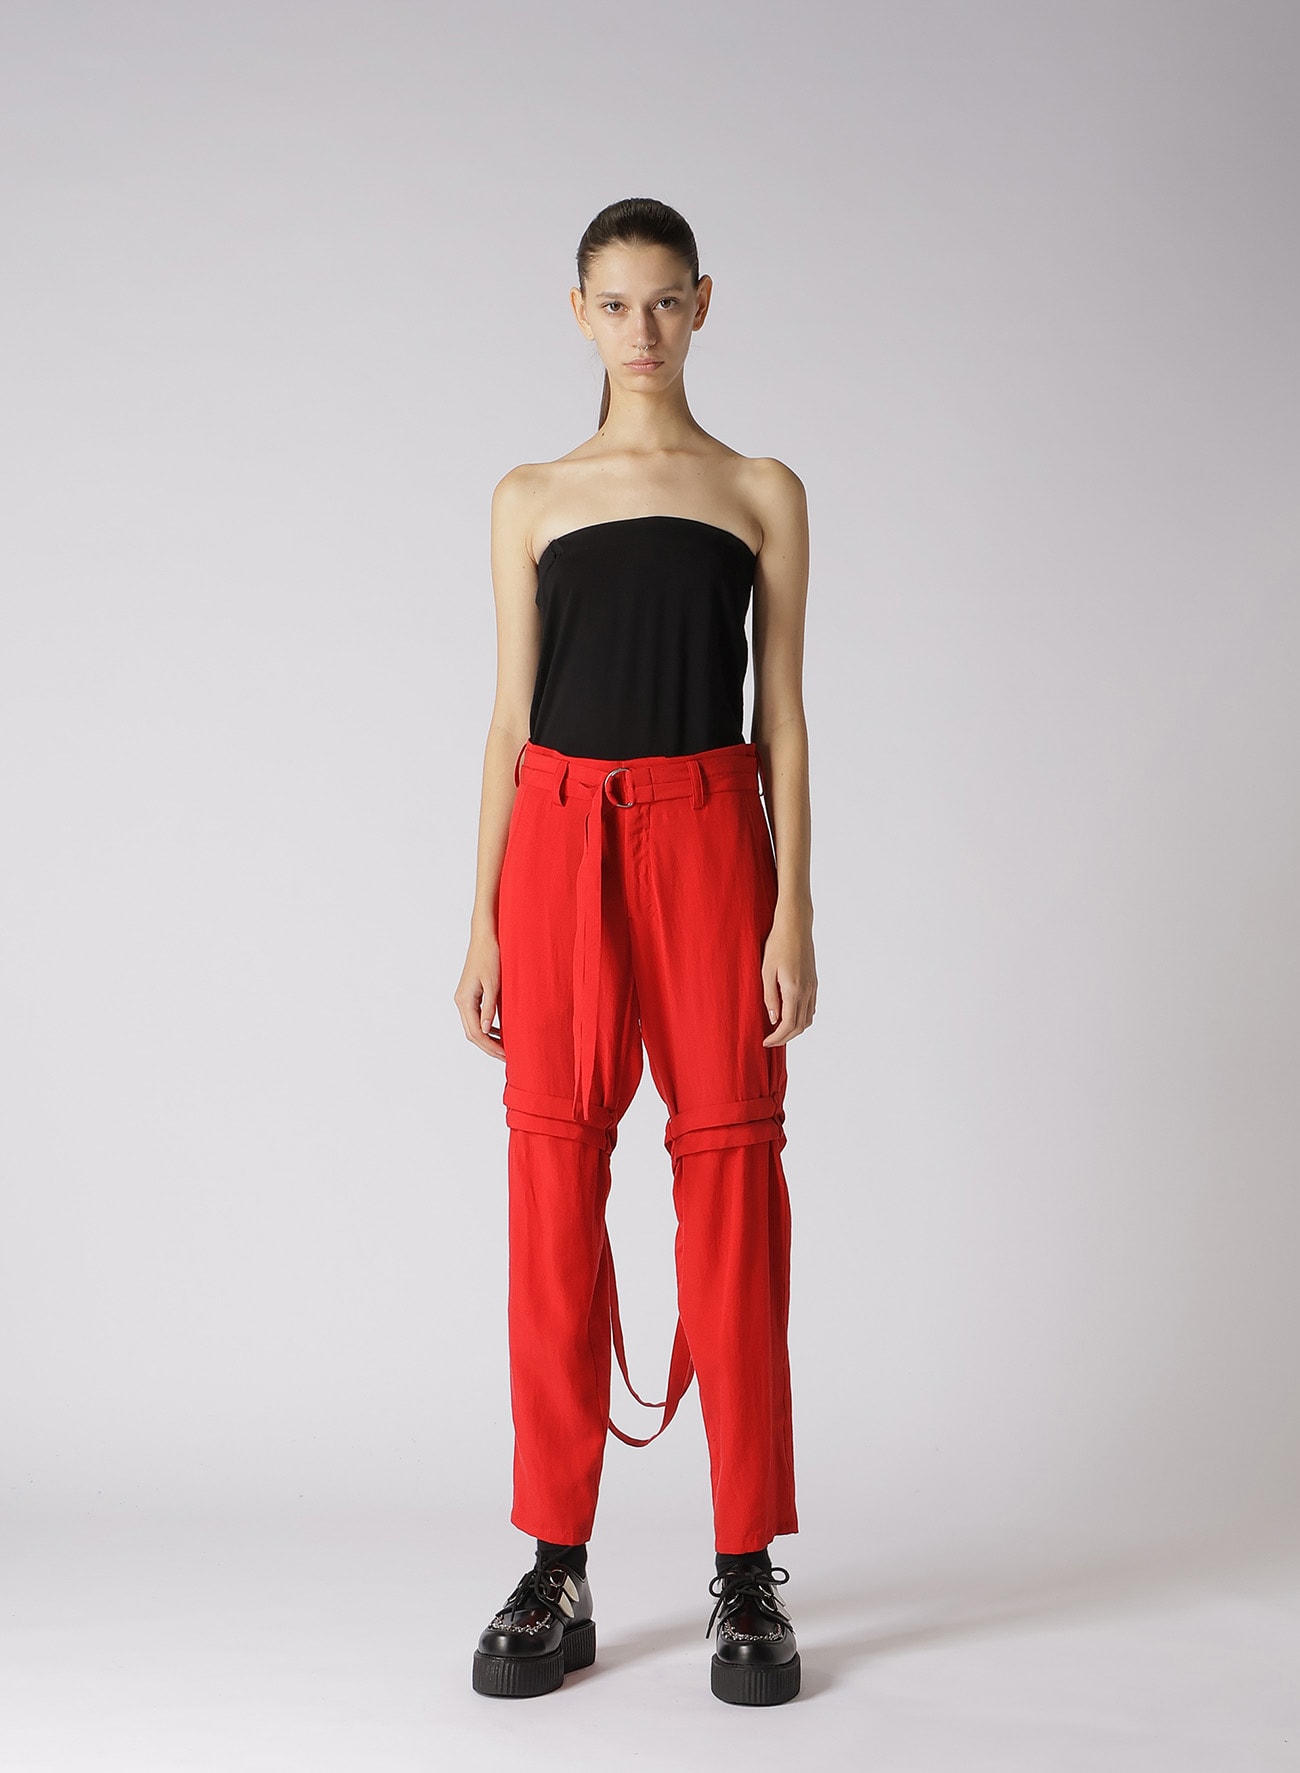 SOFT BROAD COTTON HANGING STRAP PANTS(S Red): LIMI feu｜THE SHOP 